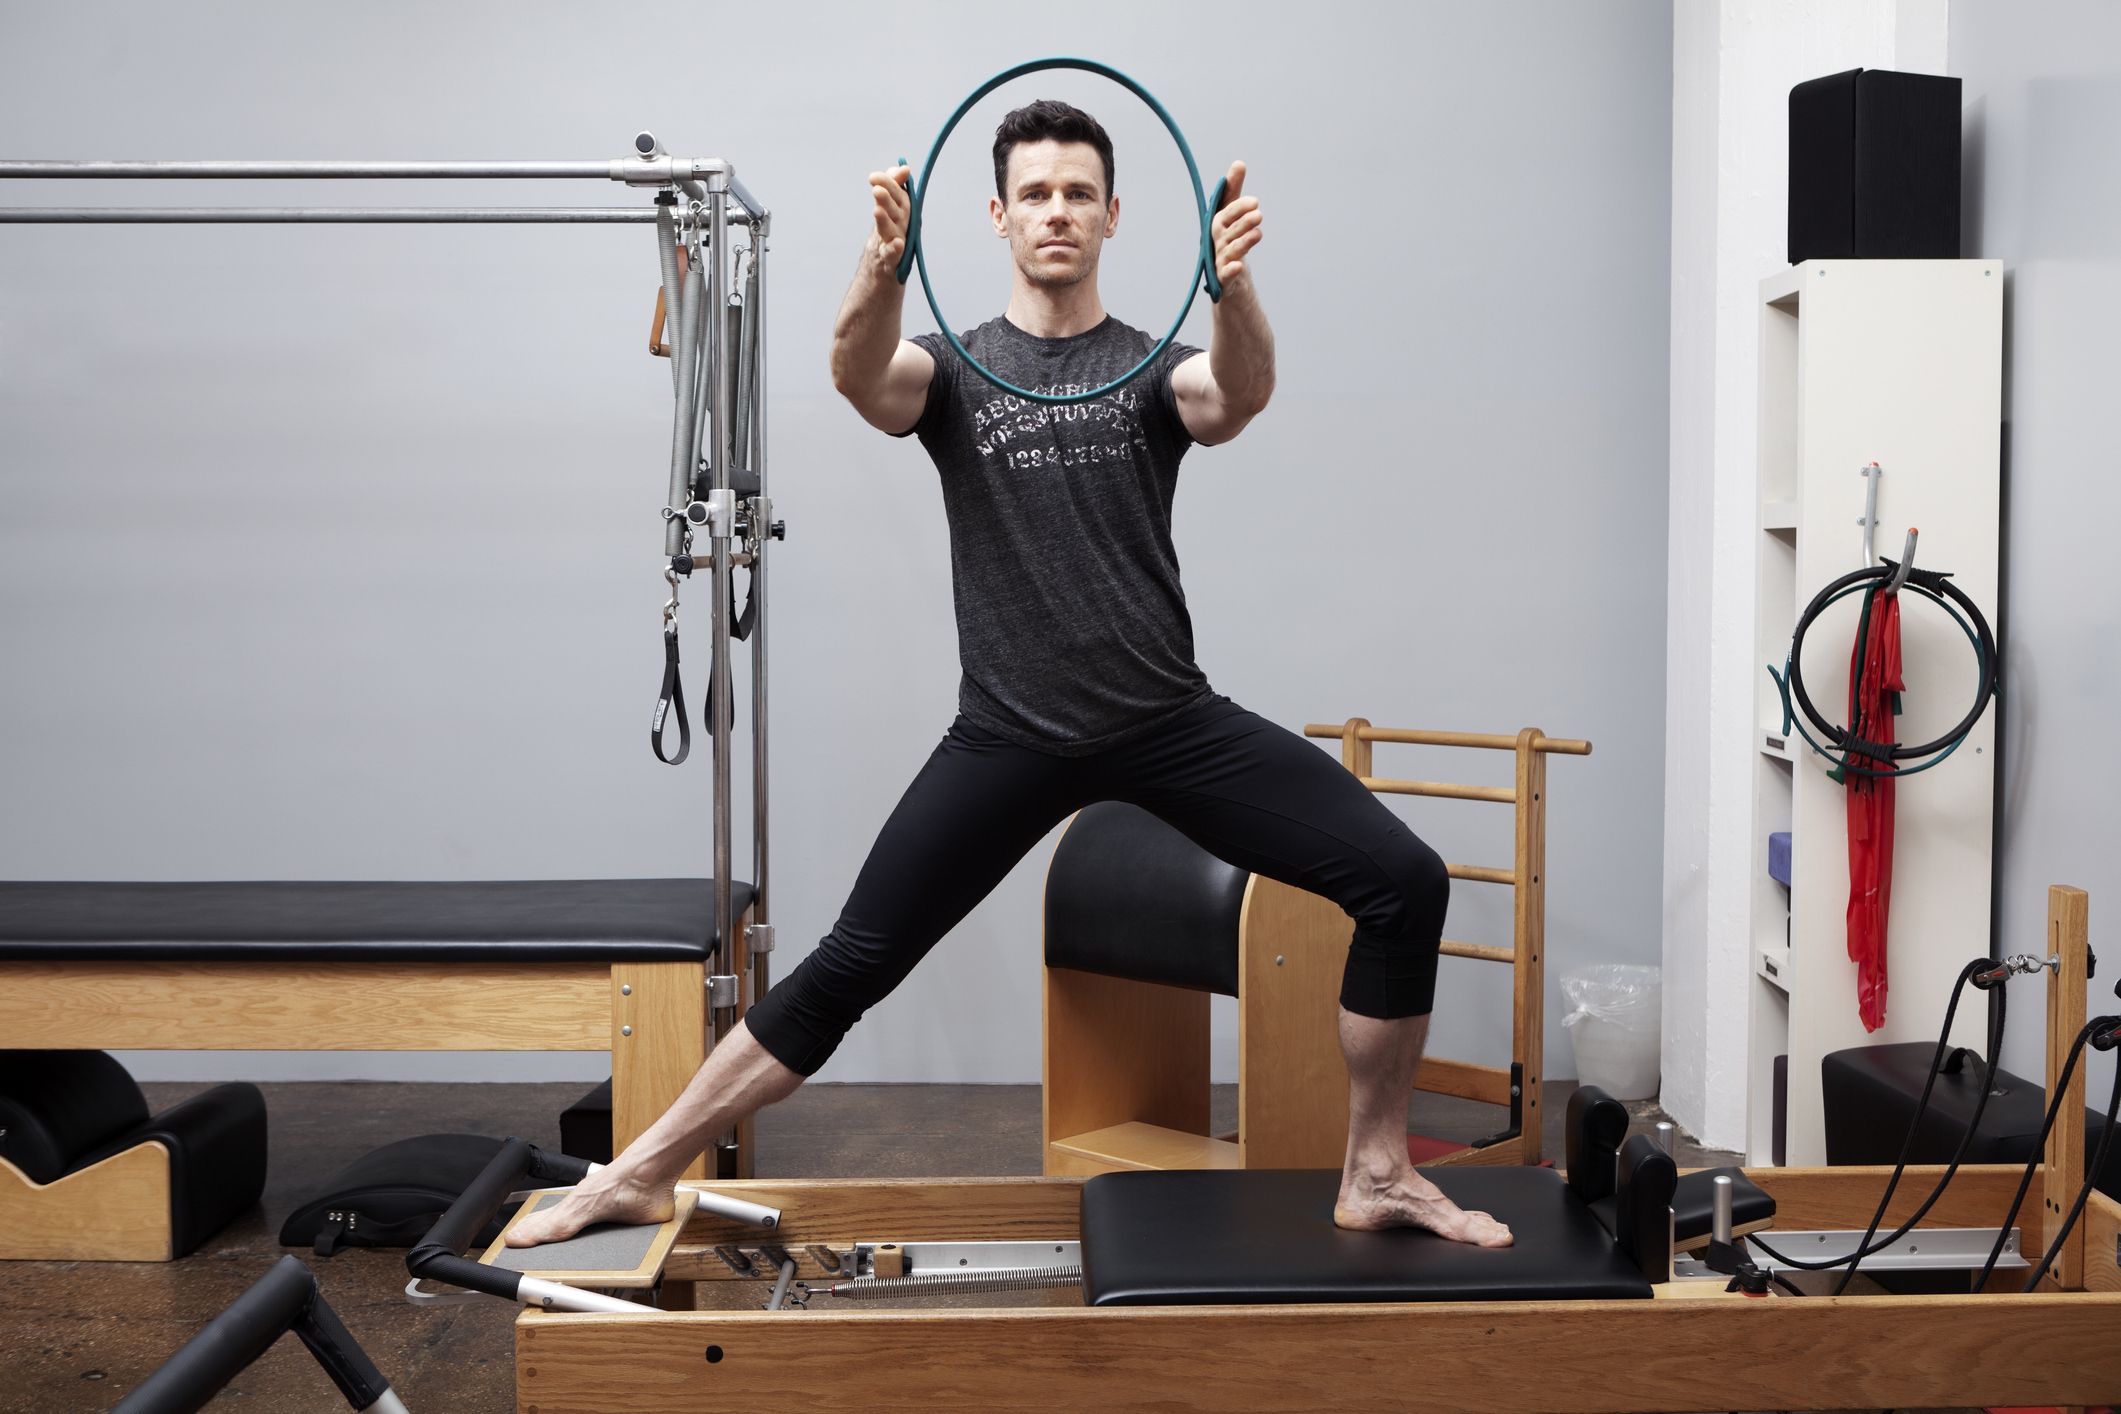 Pilates for Beginners: A Complete Guide